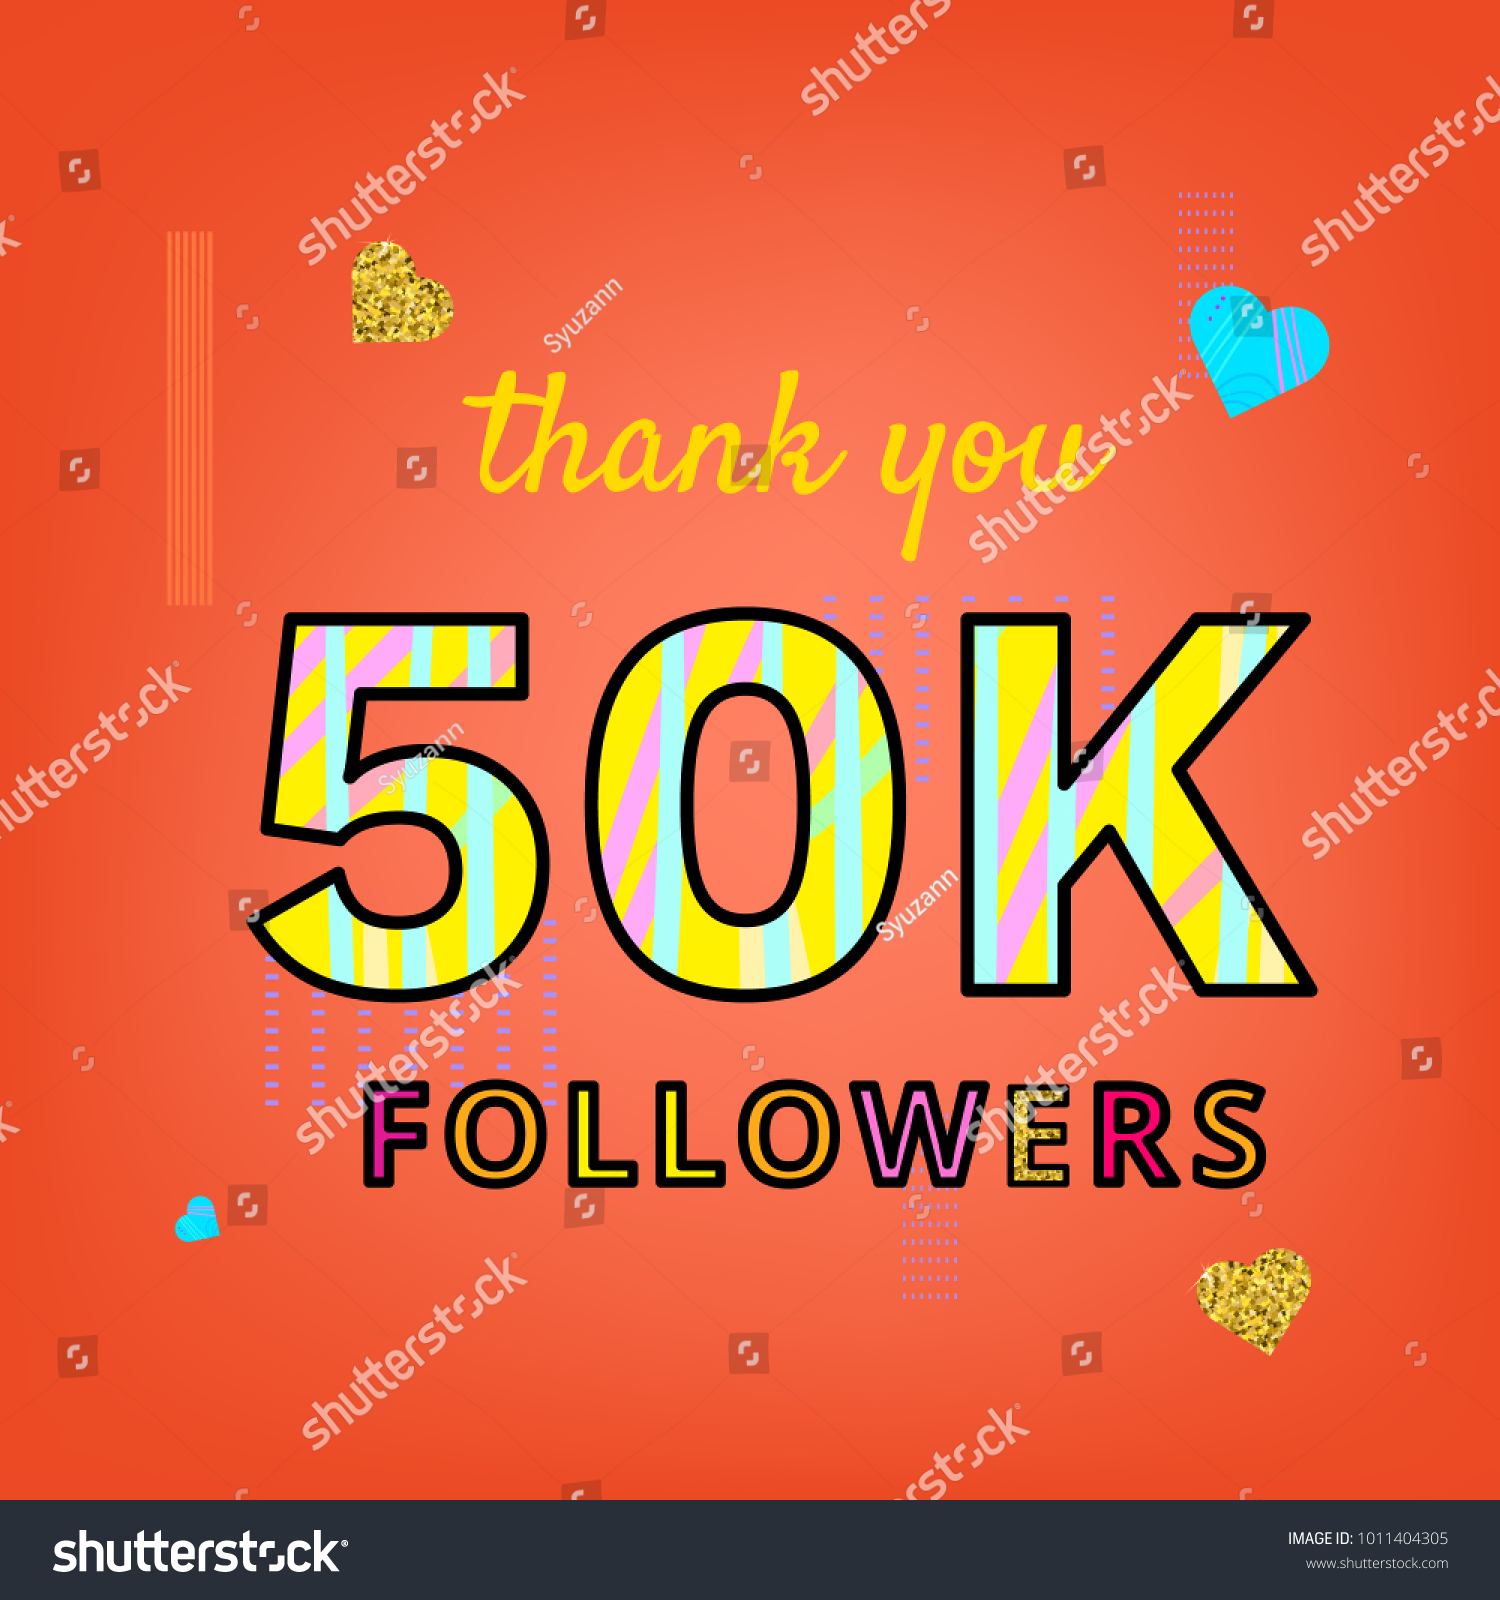 50k Followers Thank You Phrase On Bright Royalty Free Stock Vector 1011404305 1012